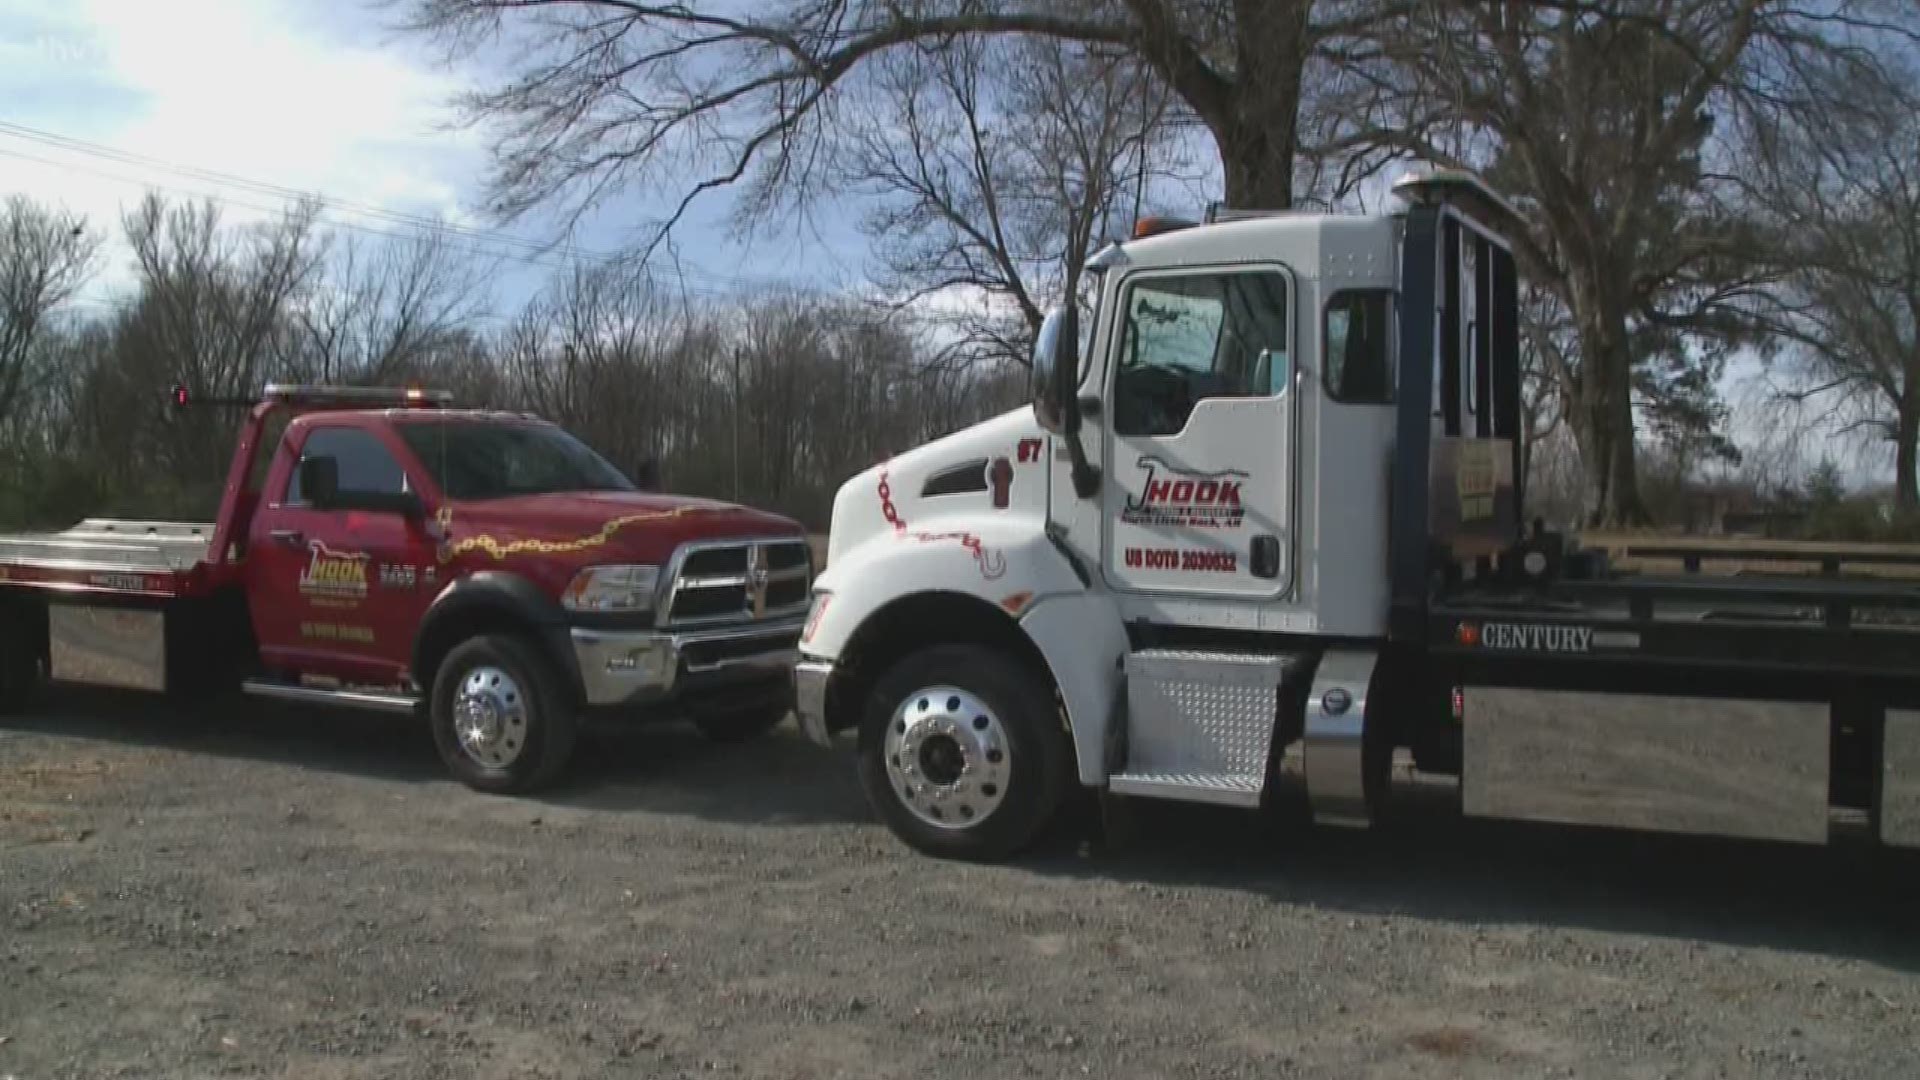 If you plan to celebrate the New Year in town, a central Arkansas tow truck company wants to help you ring in 2020 safe and sound.